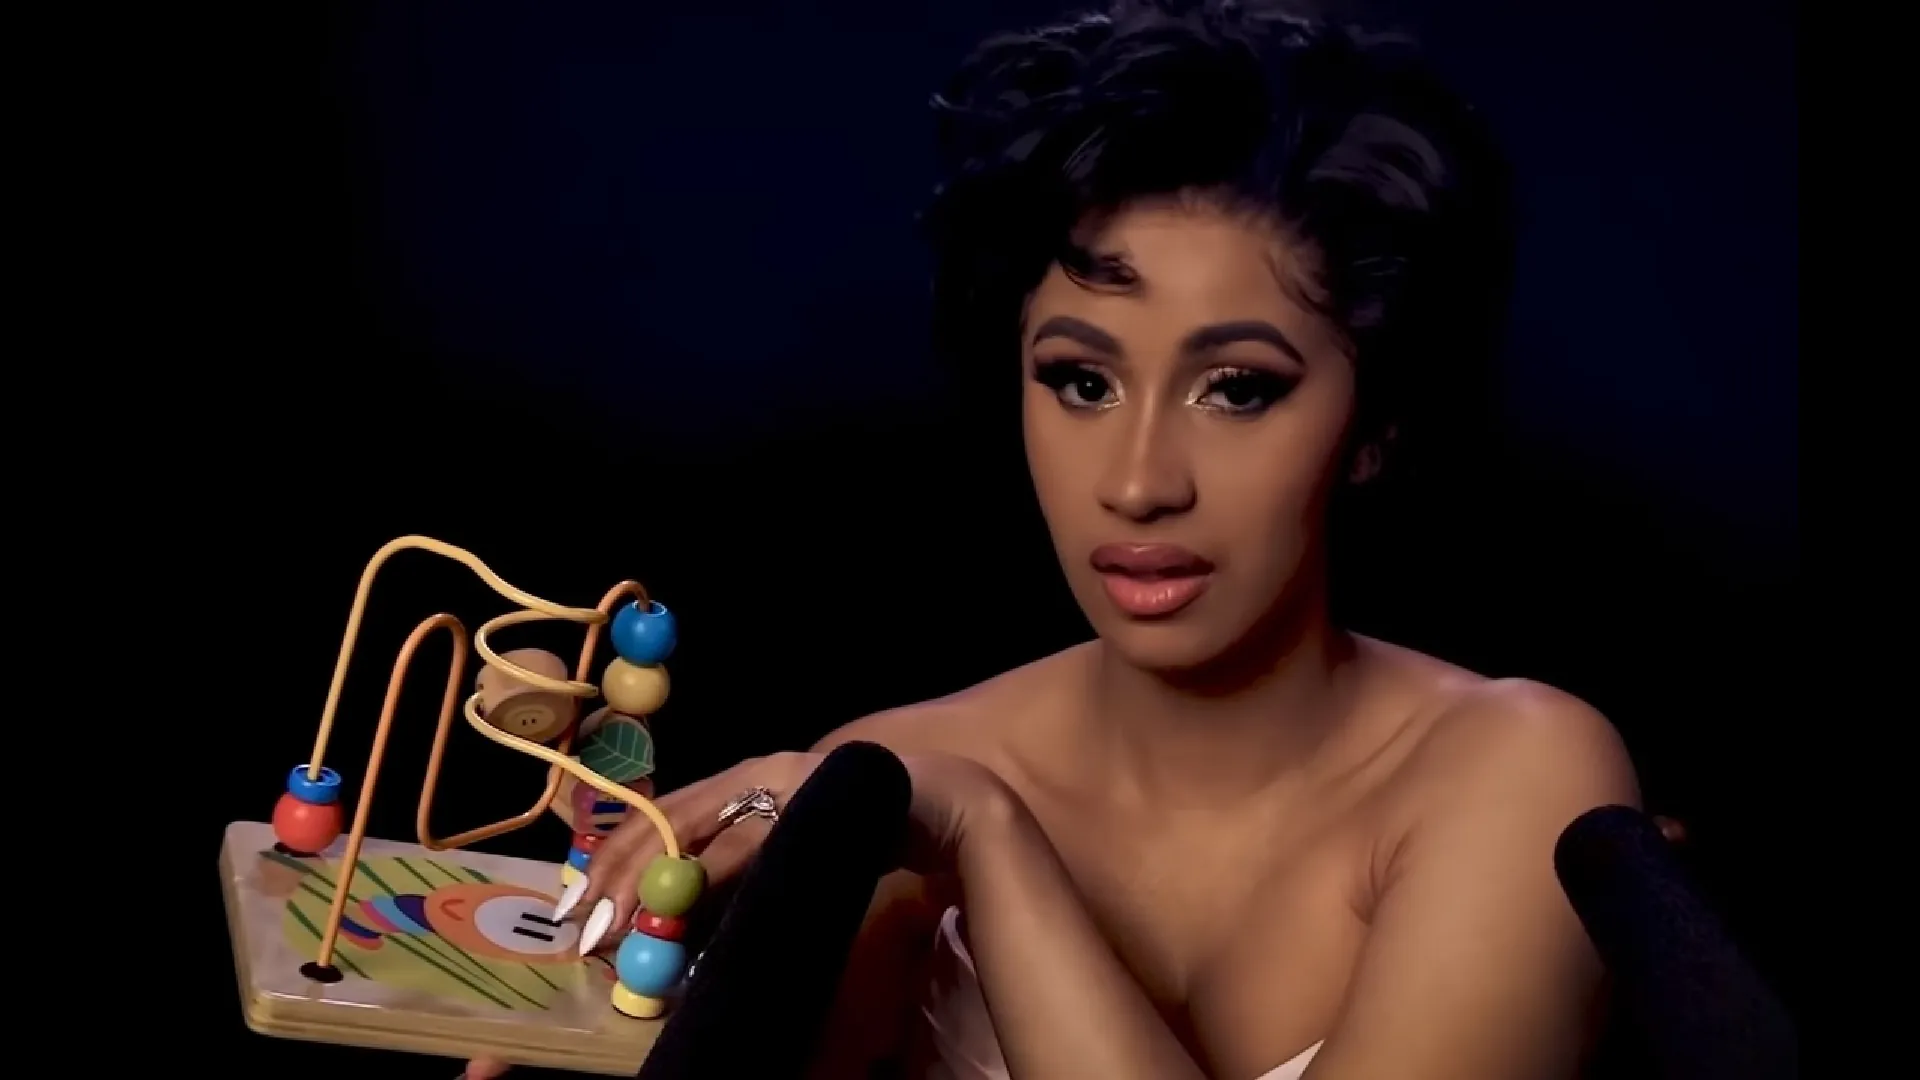 Woman files police report after microphone thrown at her during Cardi B concert=